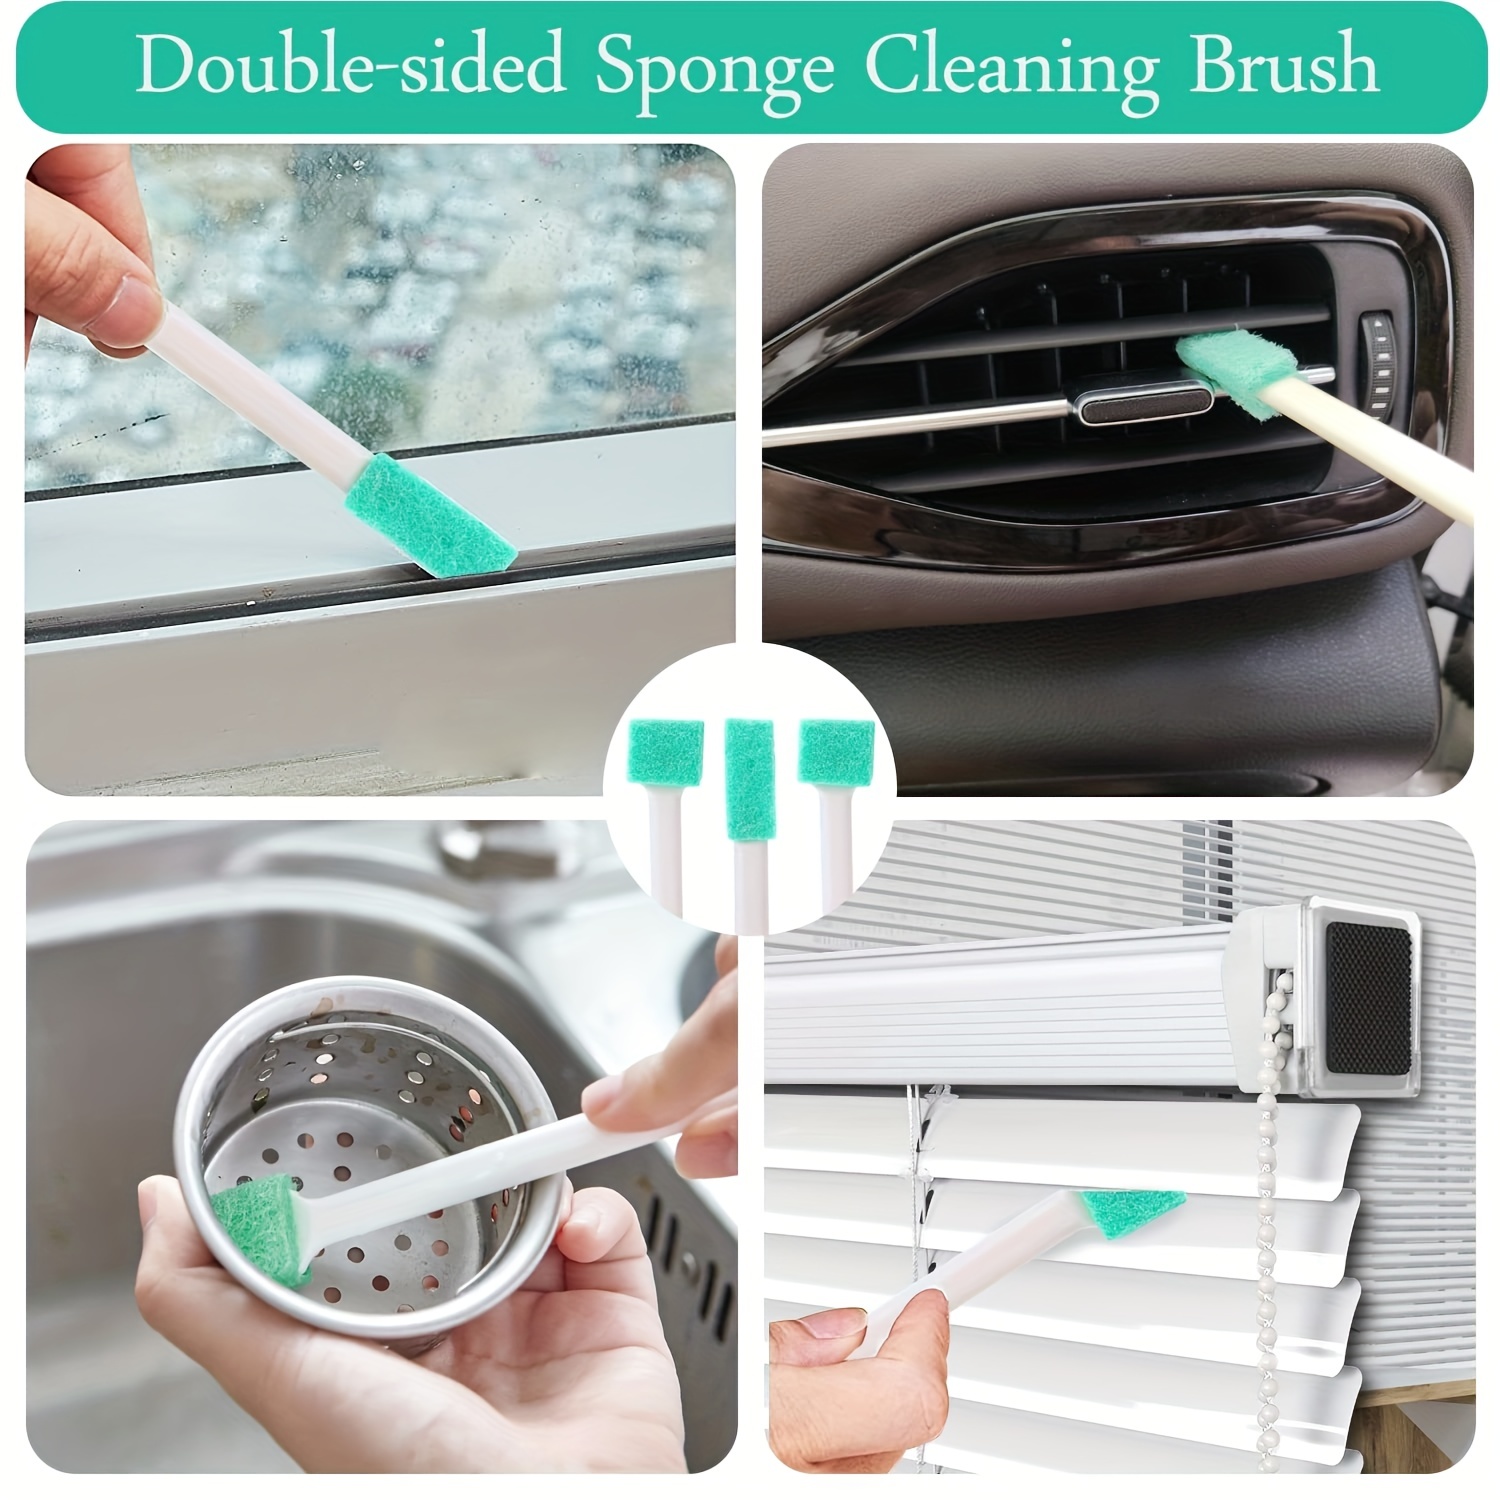 Small Cleaning Brushes for Household Cleaning,Crevice Cleaning Tool Set for  Window Tracks Groove Humidifier Car Bottle Toilet Keyboard,Detail Tiny